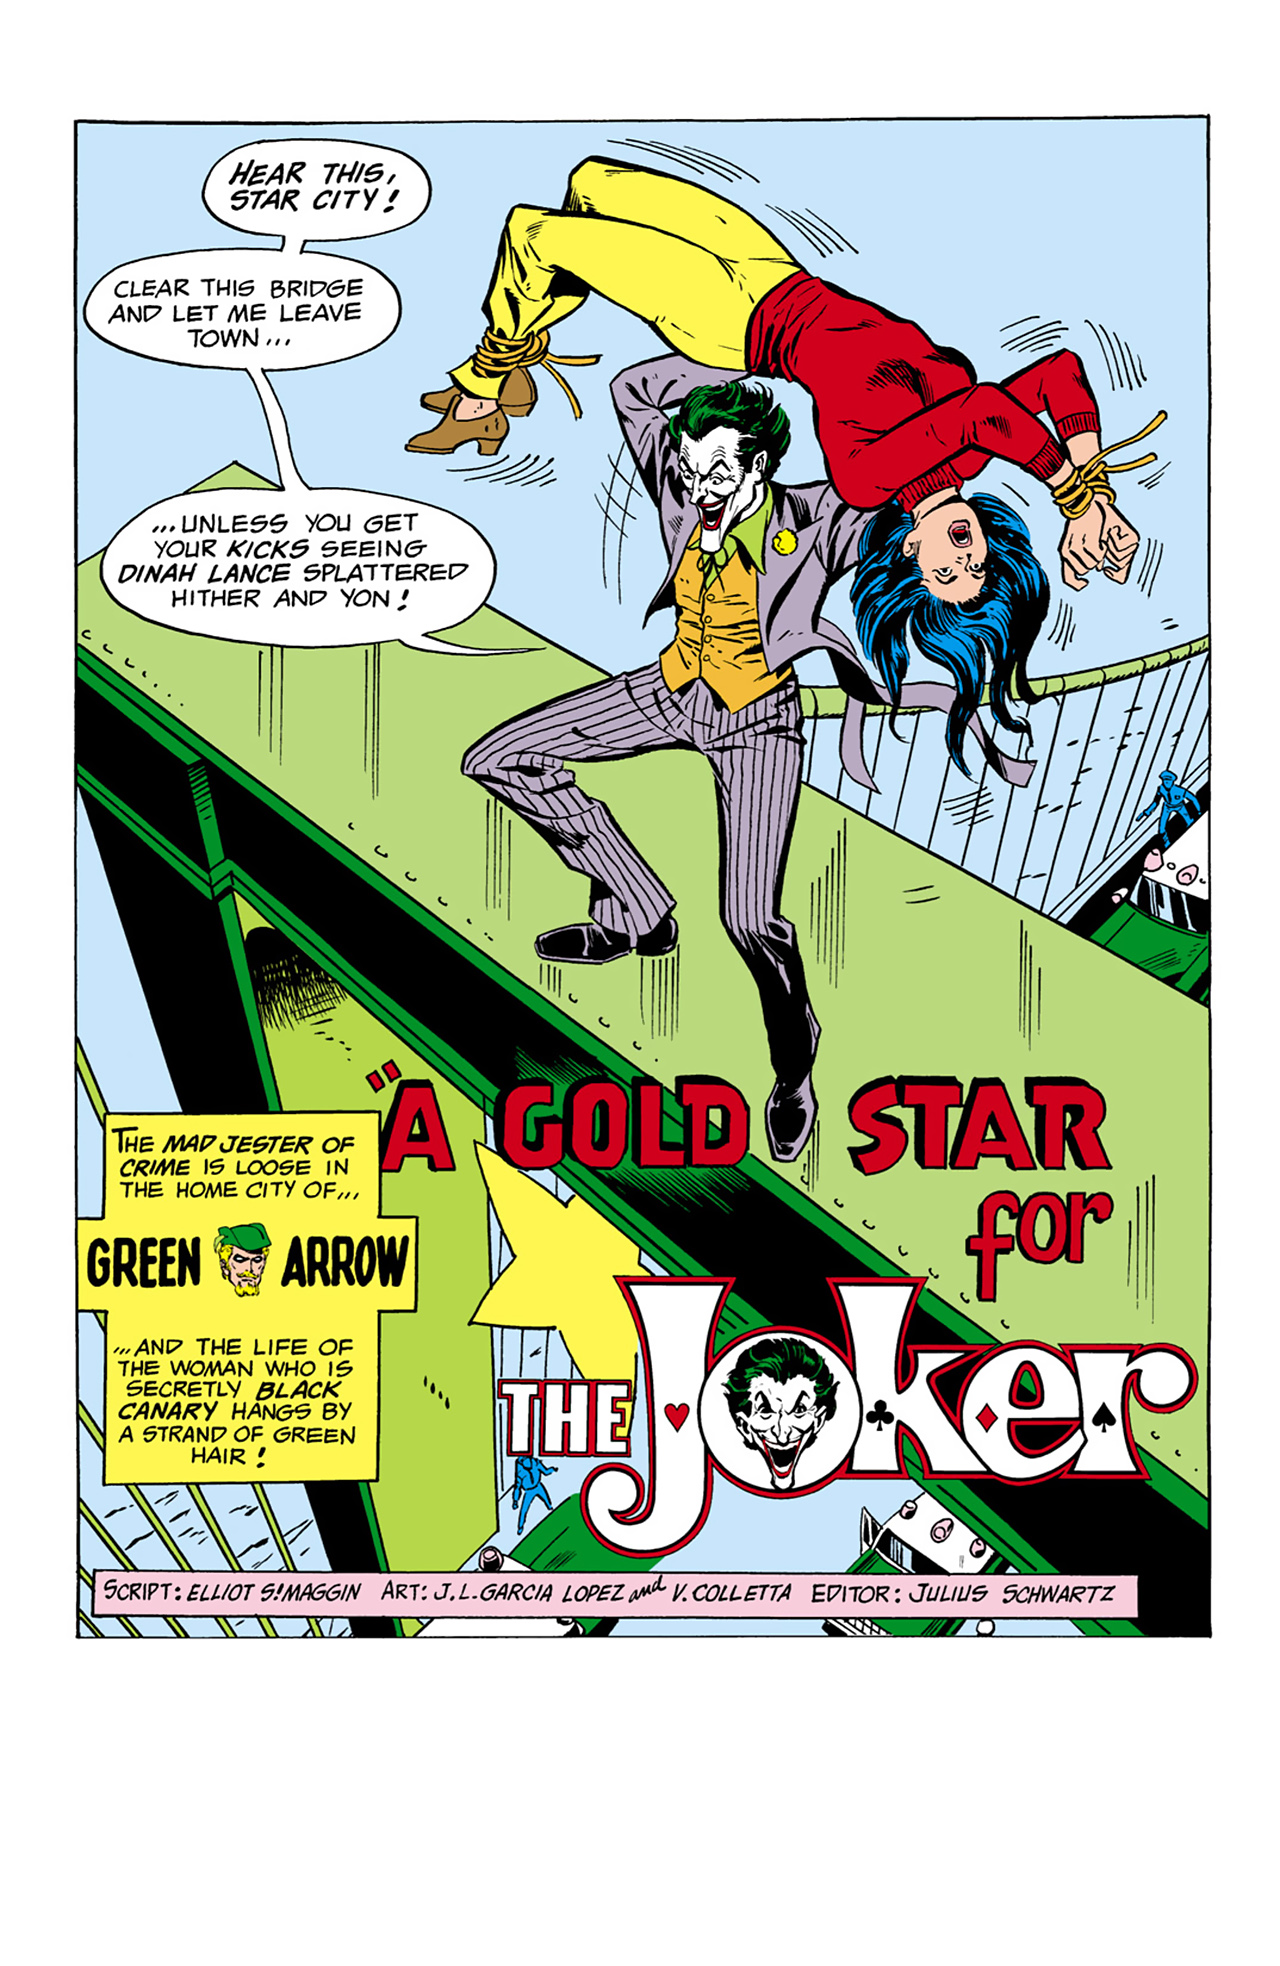 The Joker (1975-1976 + 2019): Chapter 4 - Page 2